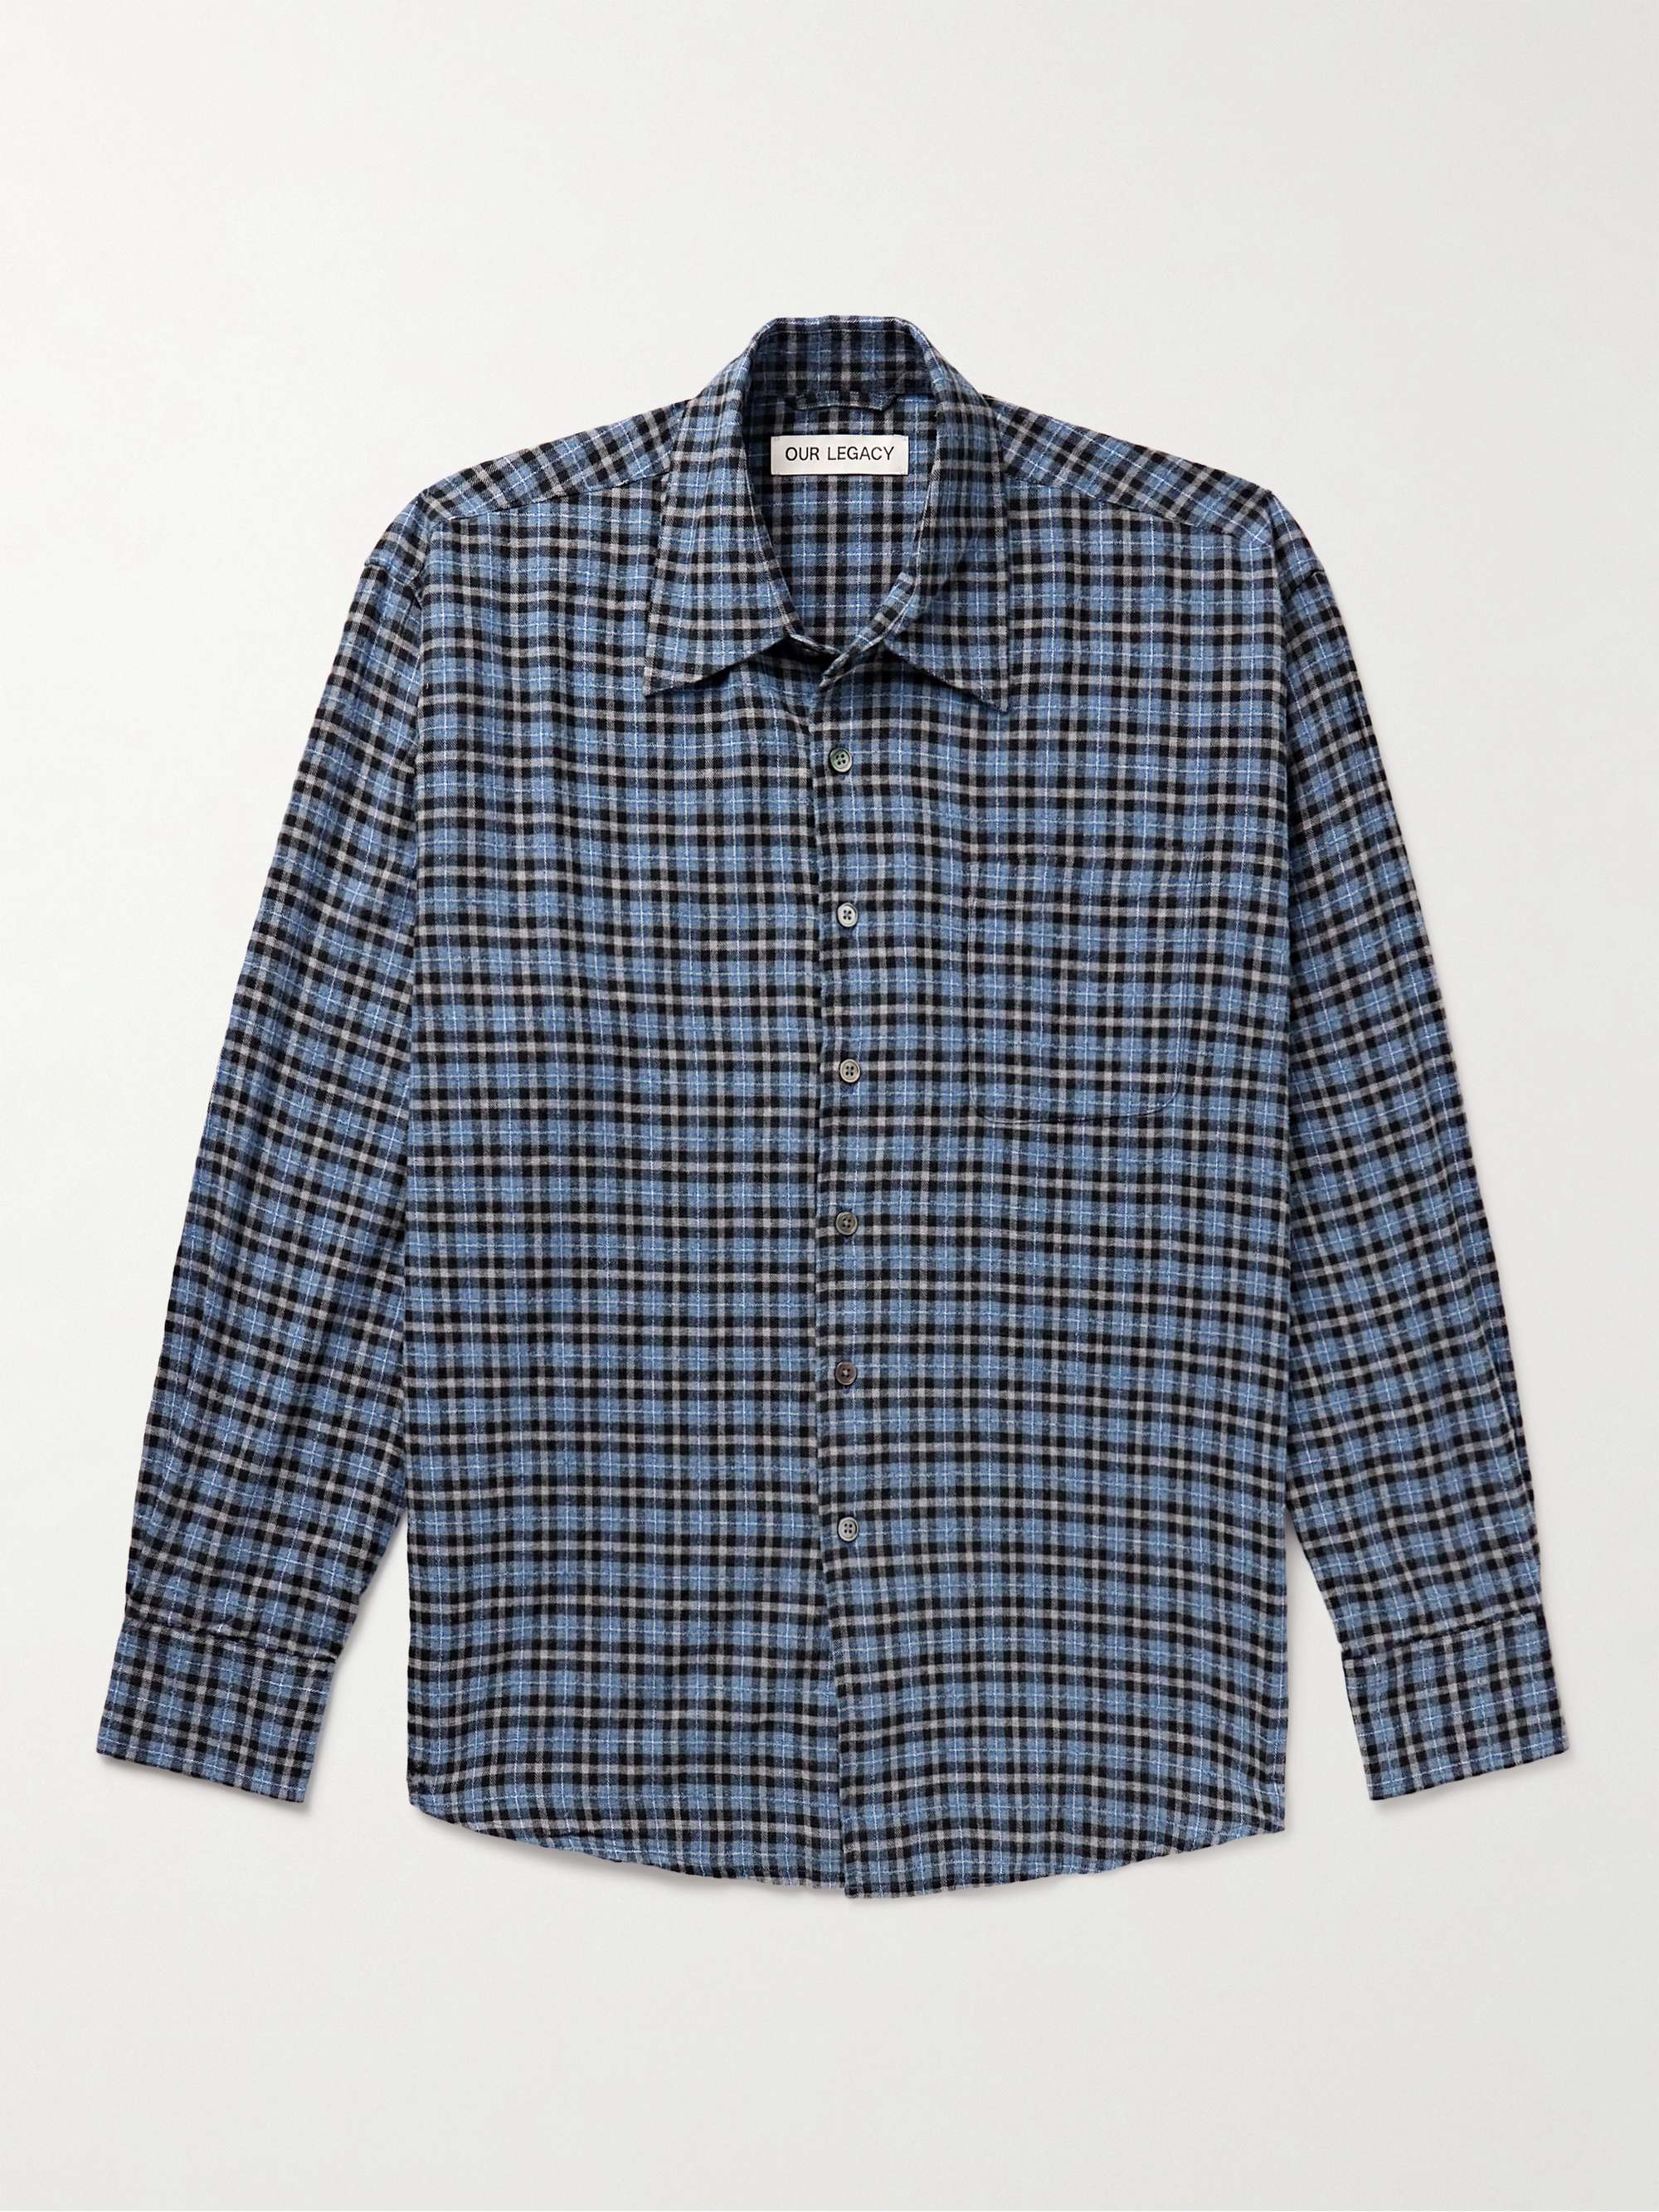 Above Checked Cotton-Blend Flannel Shirt